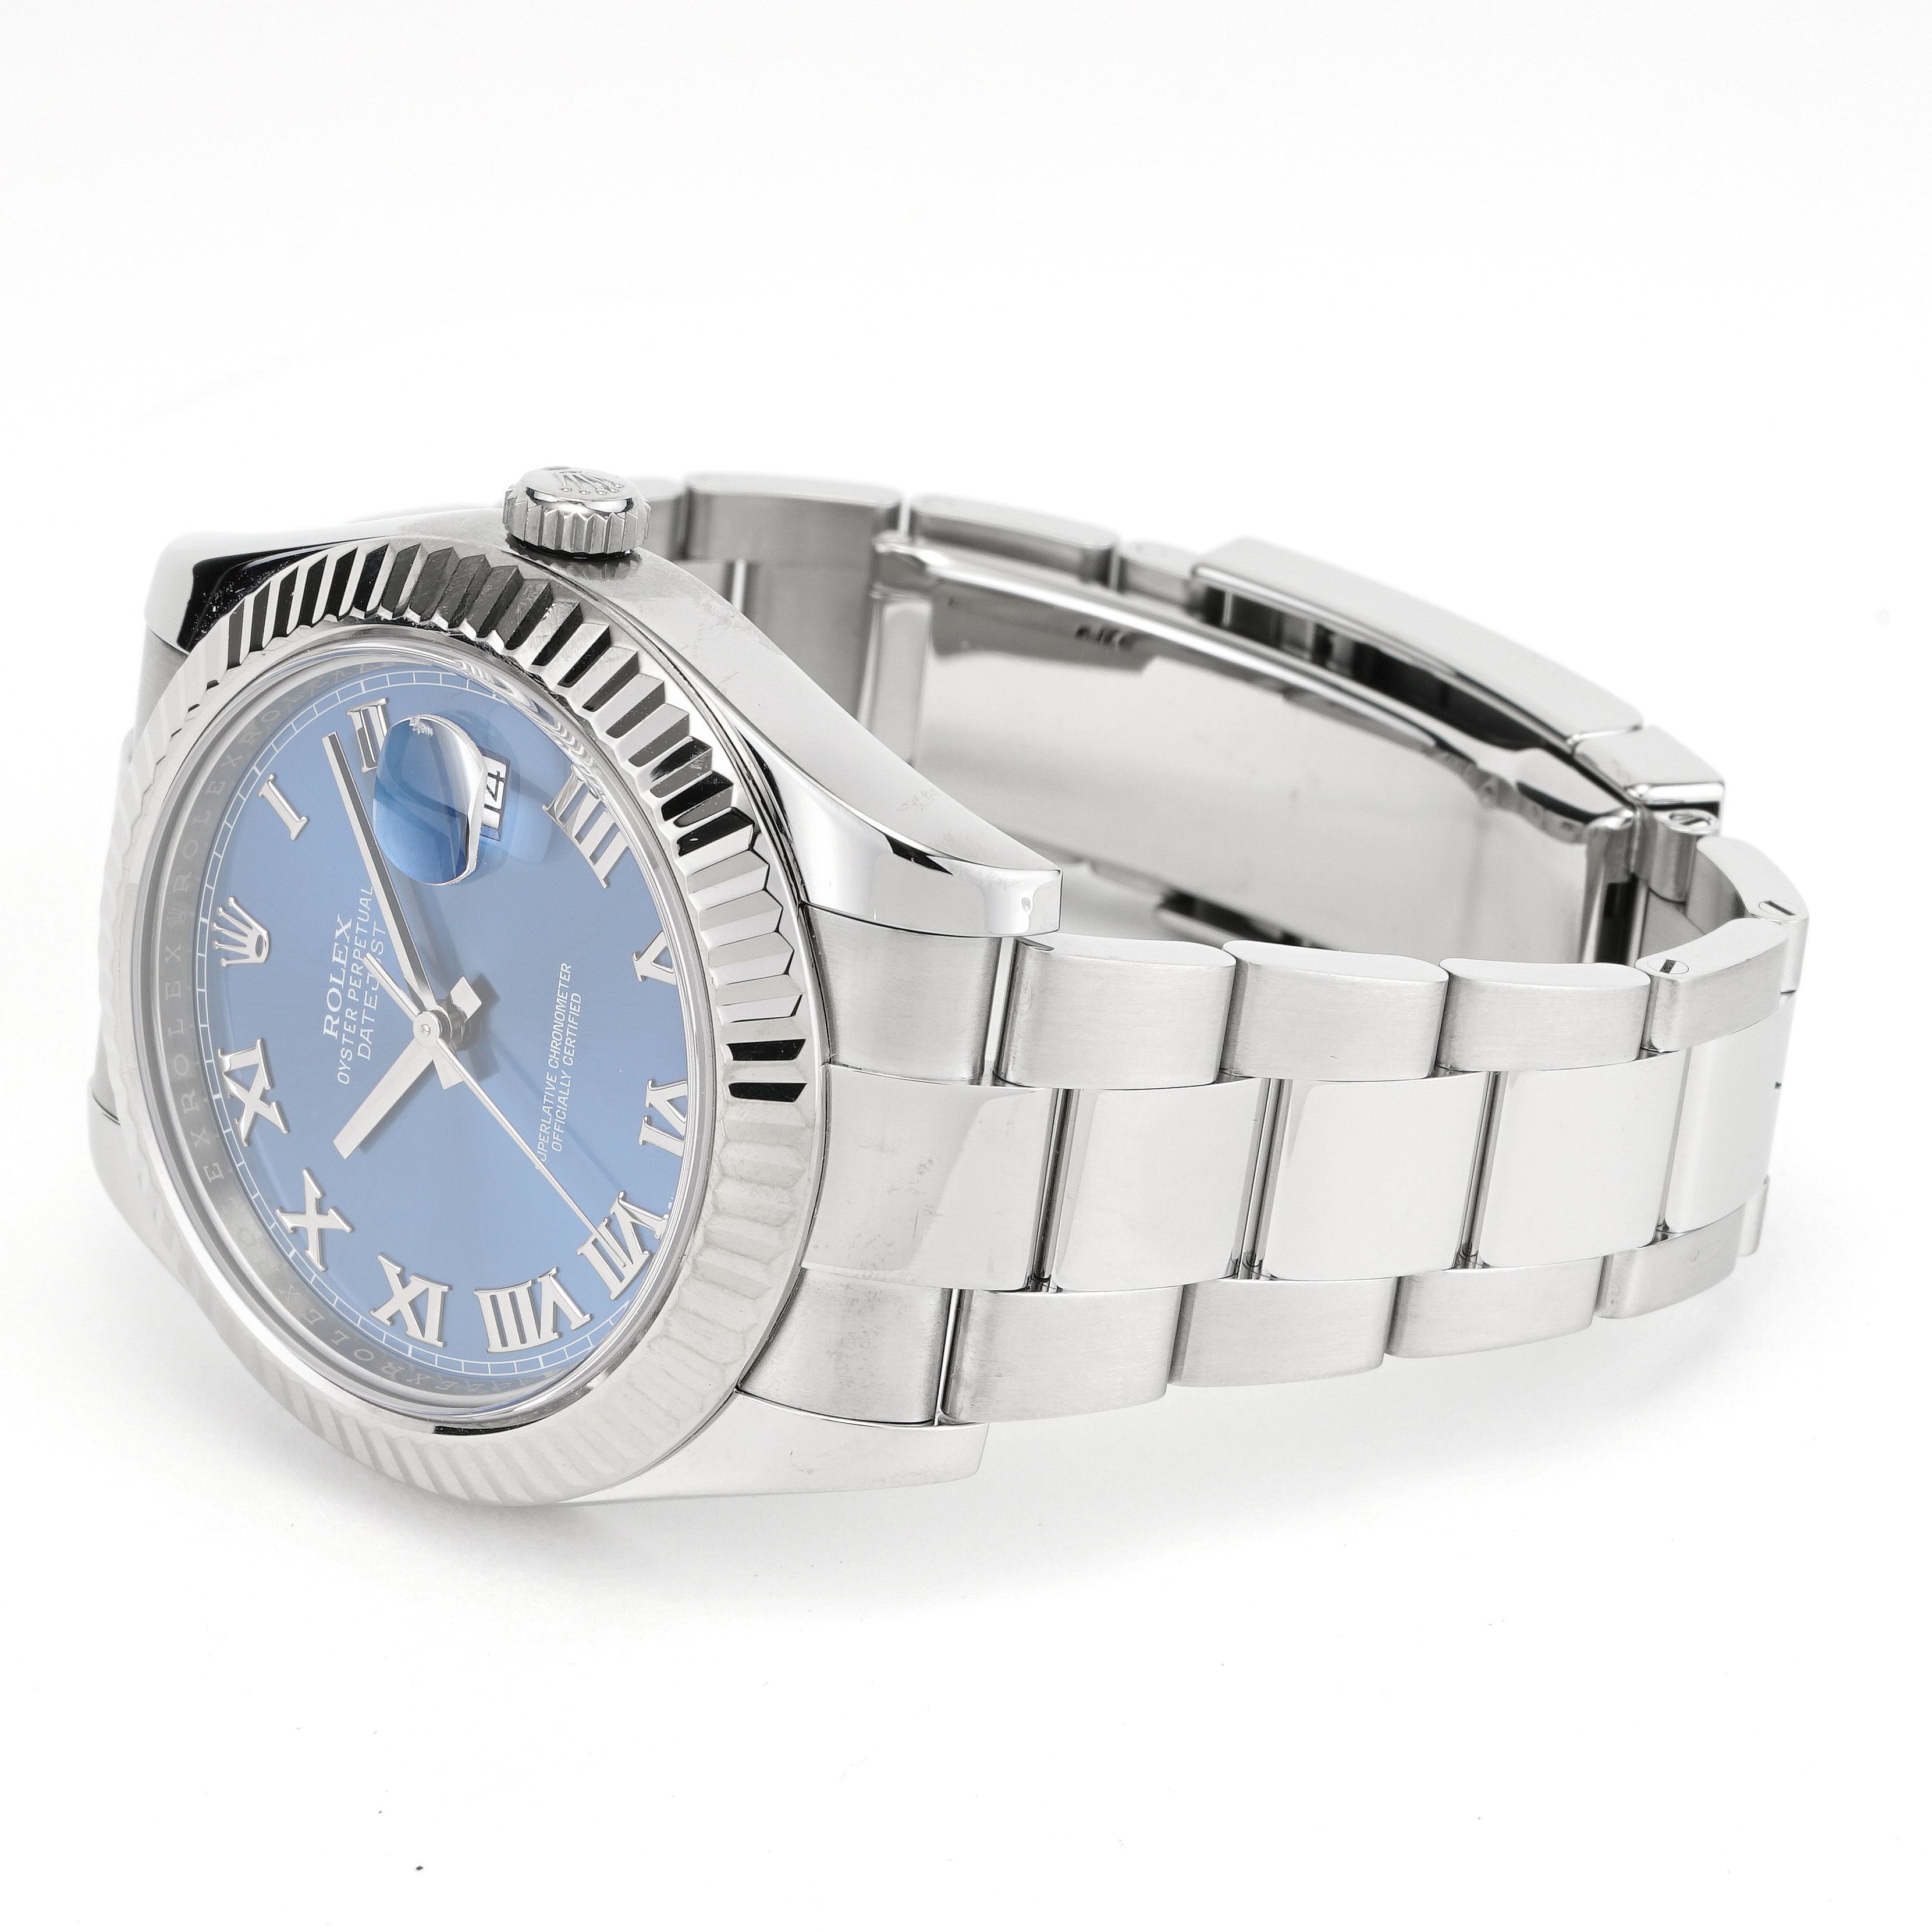 Rolex Datejust II 41mm Blue Dial | New York Jewelers Chicago